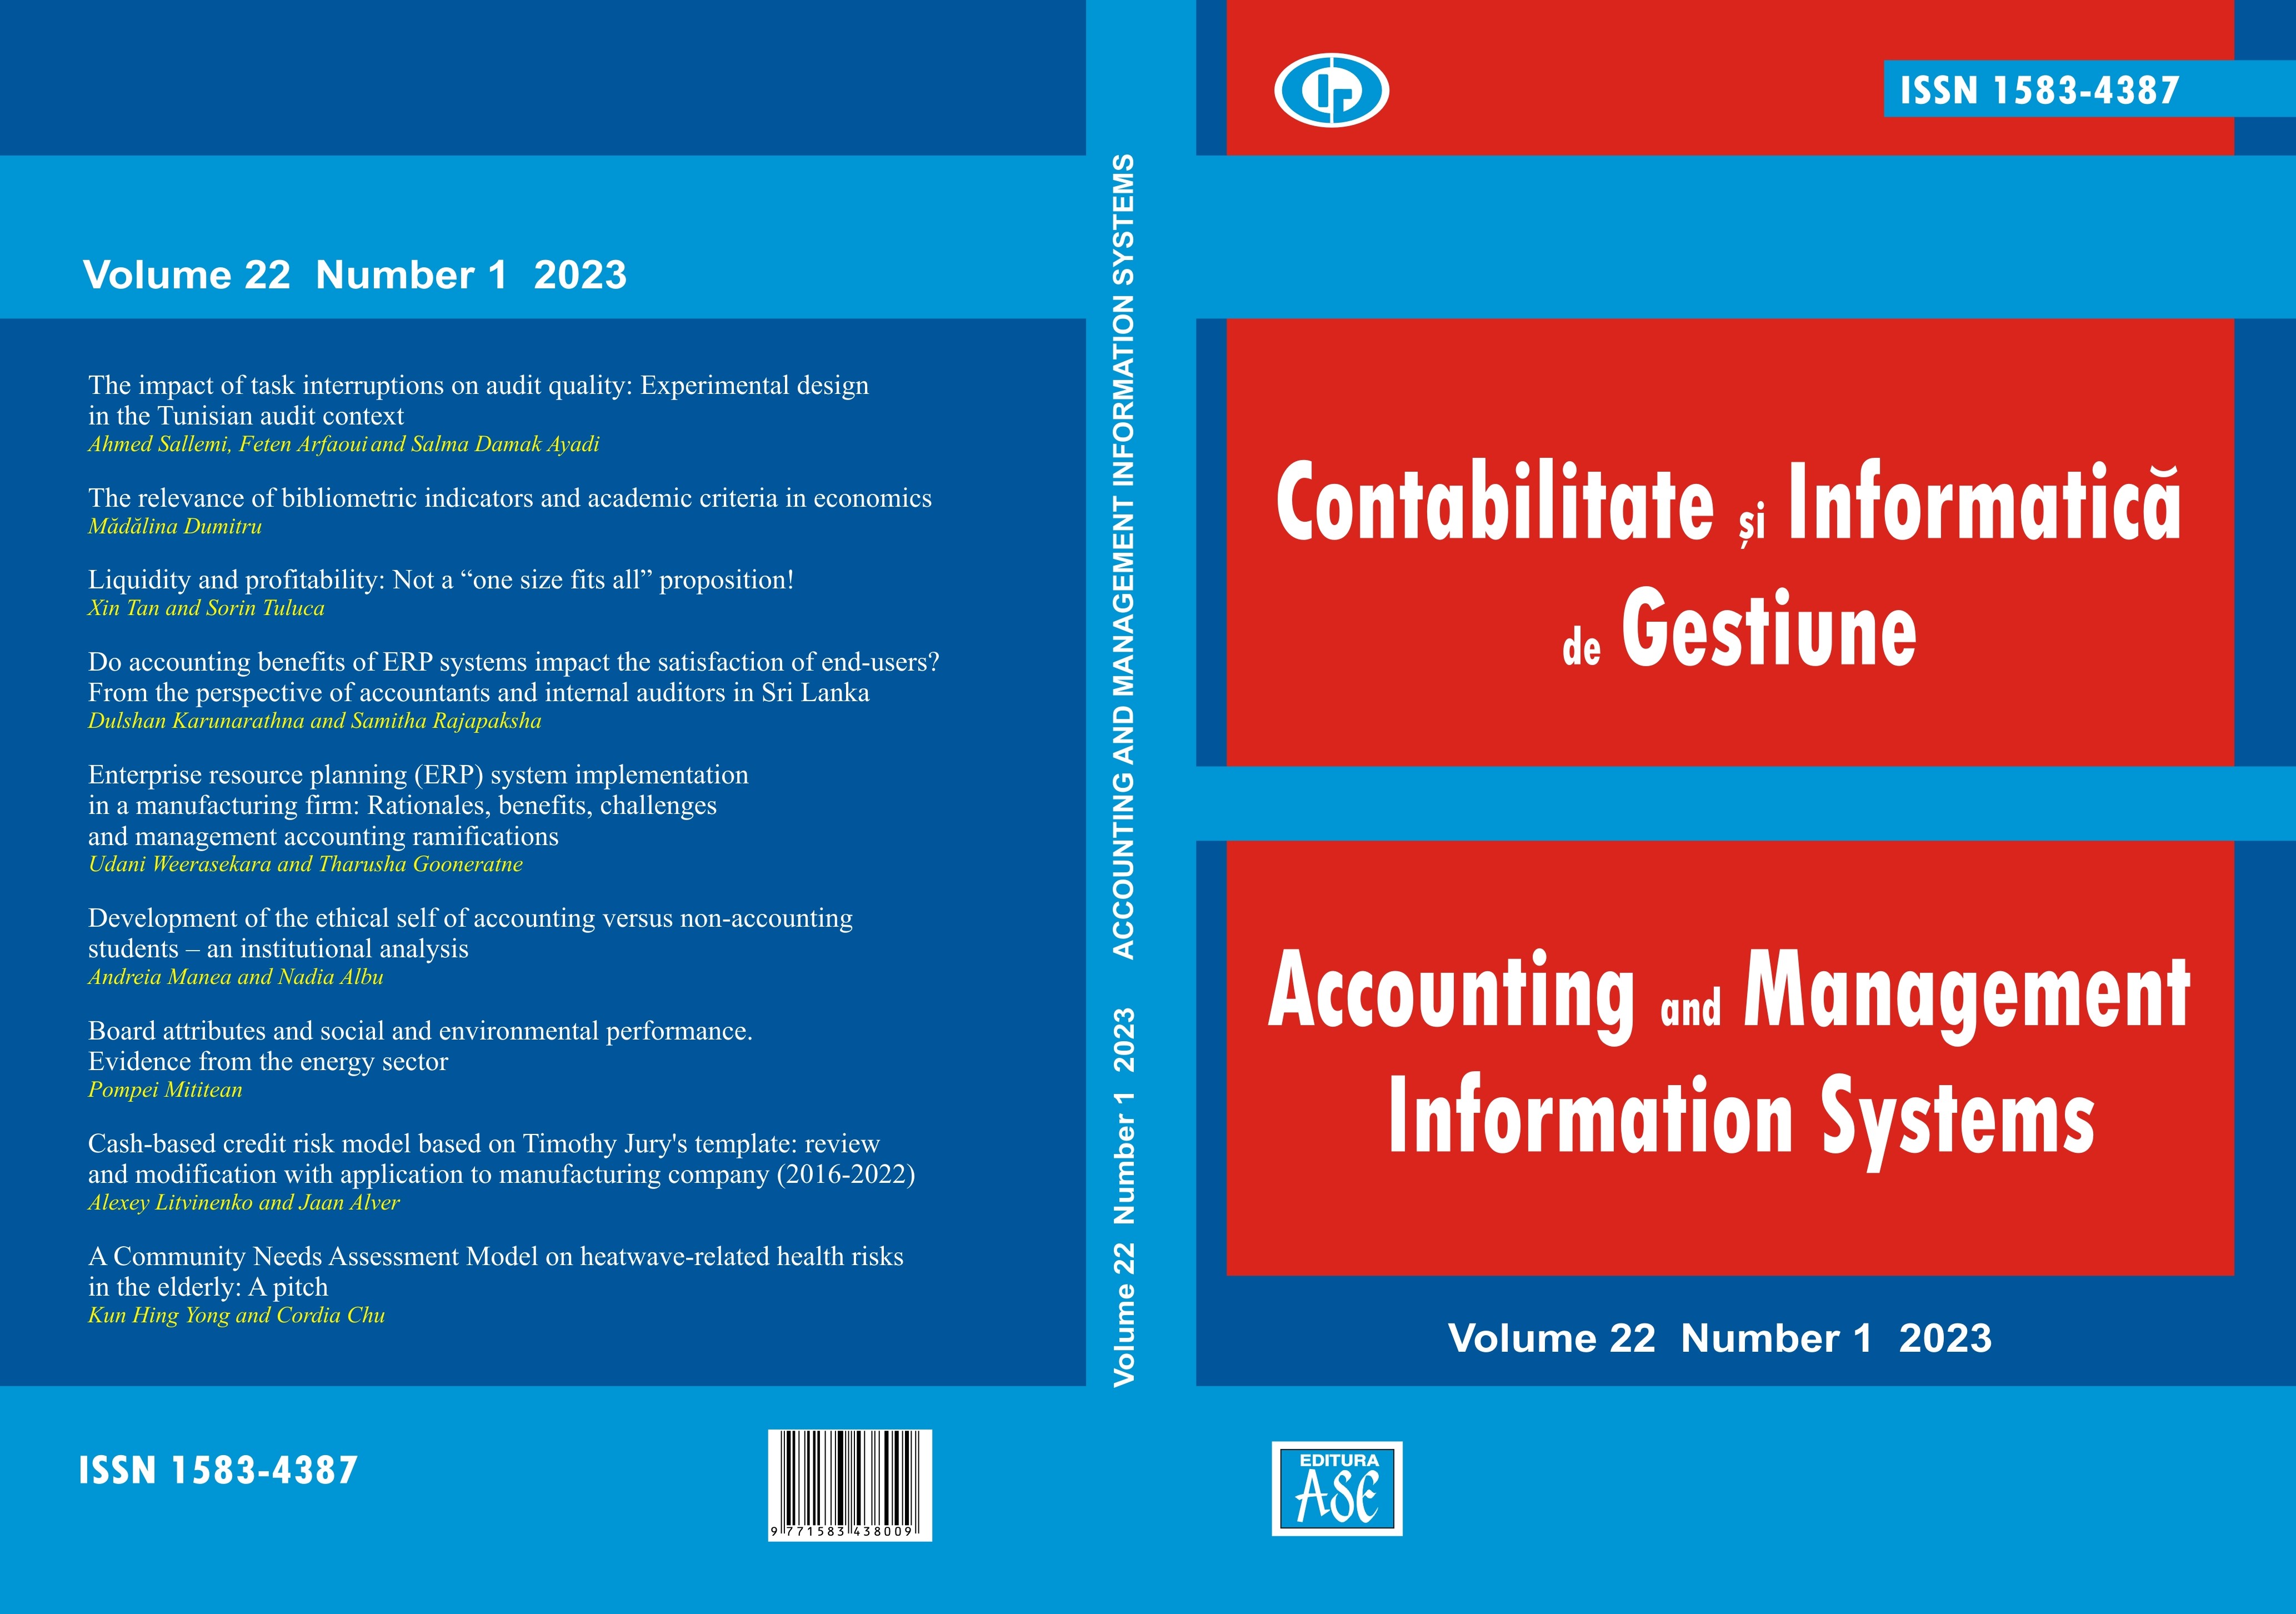 Enterprise resource planning (ERP) system implementation in a manufacturing firm: Rationales, benefits, challenges and management accounting ramifications Cover Image